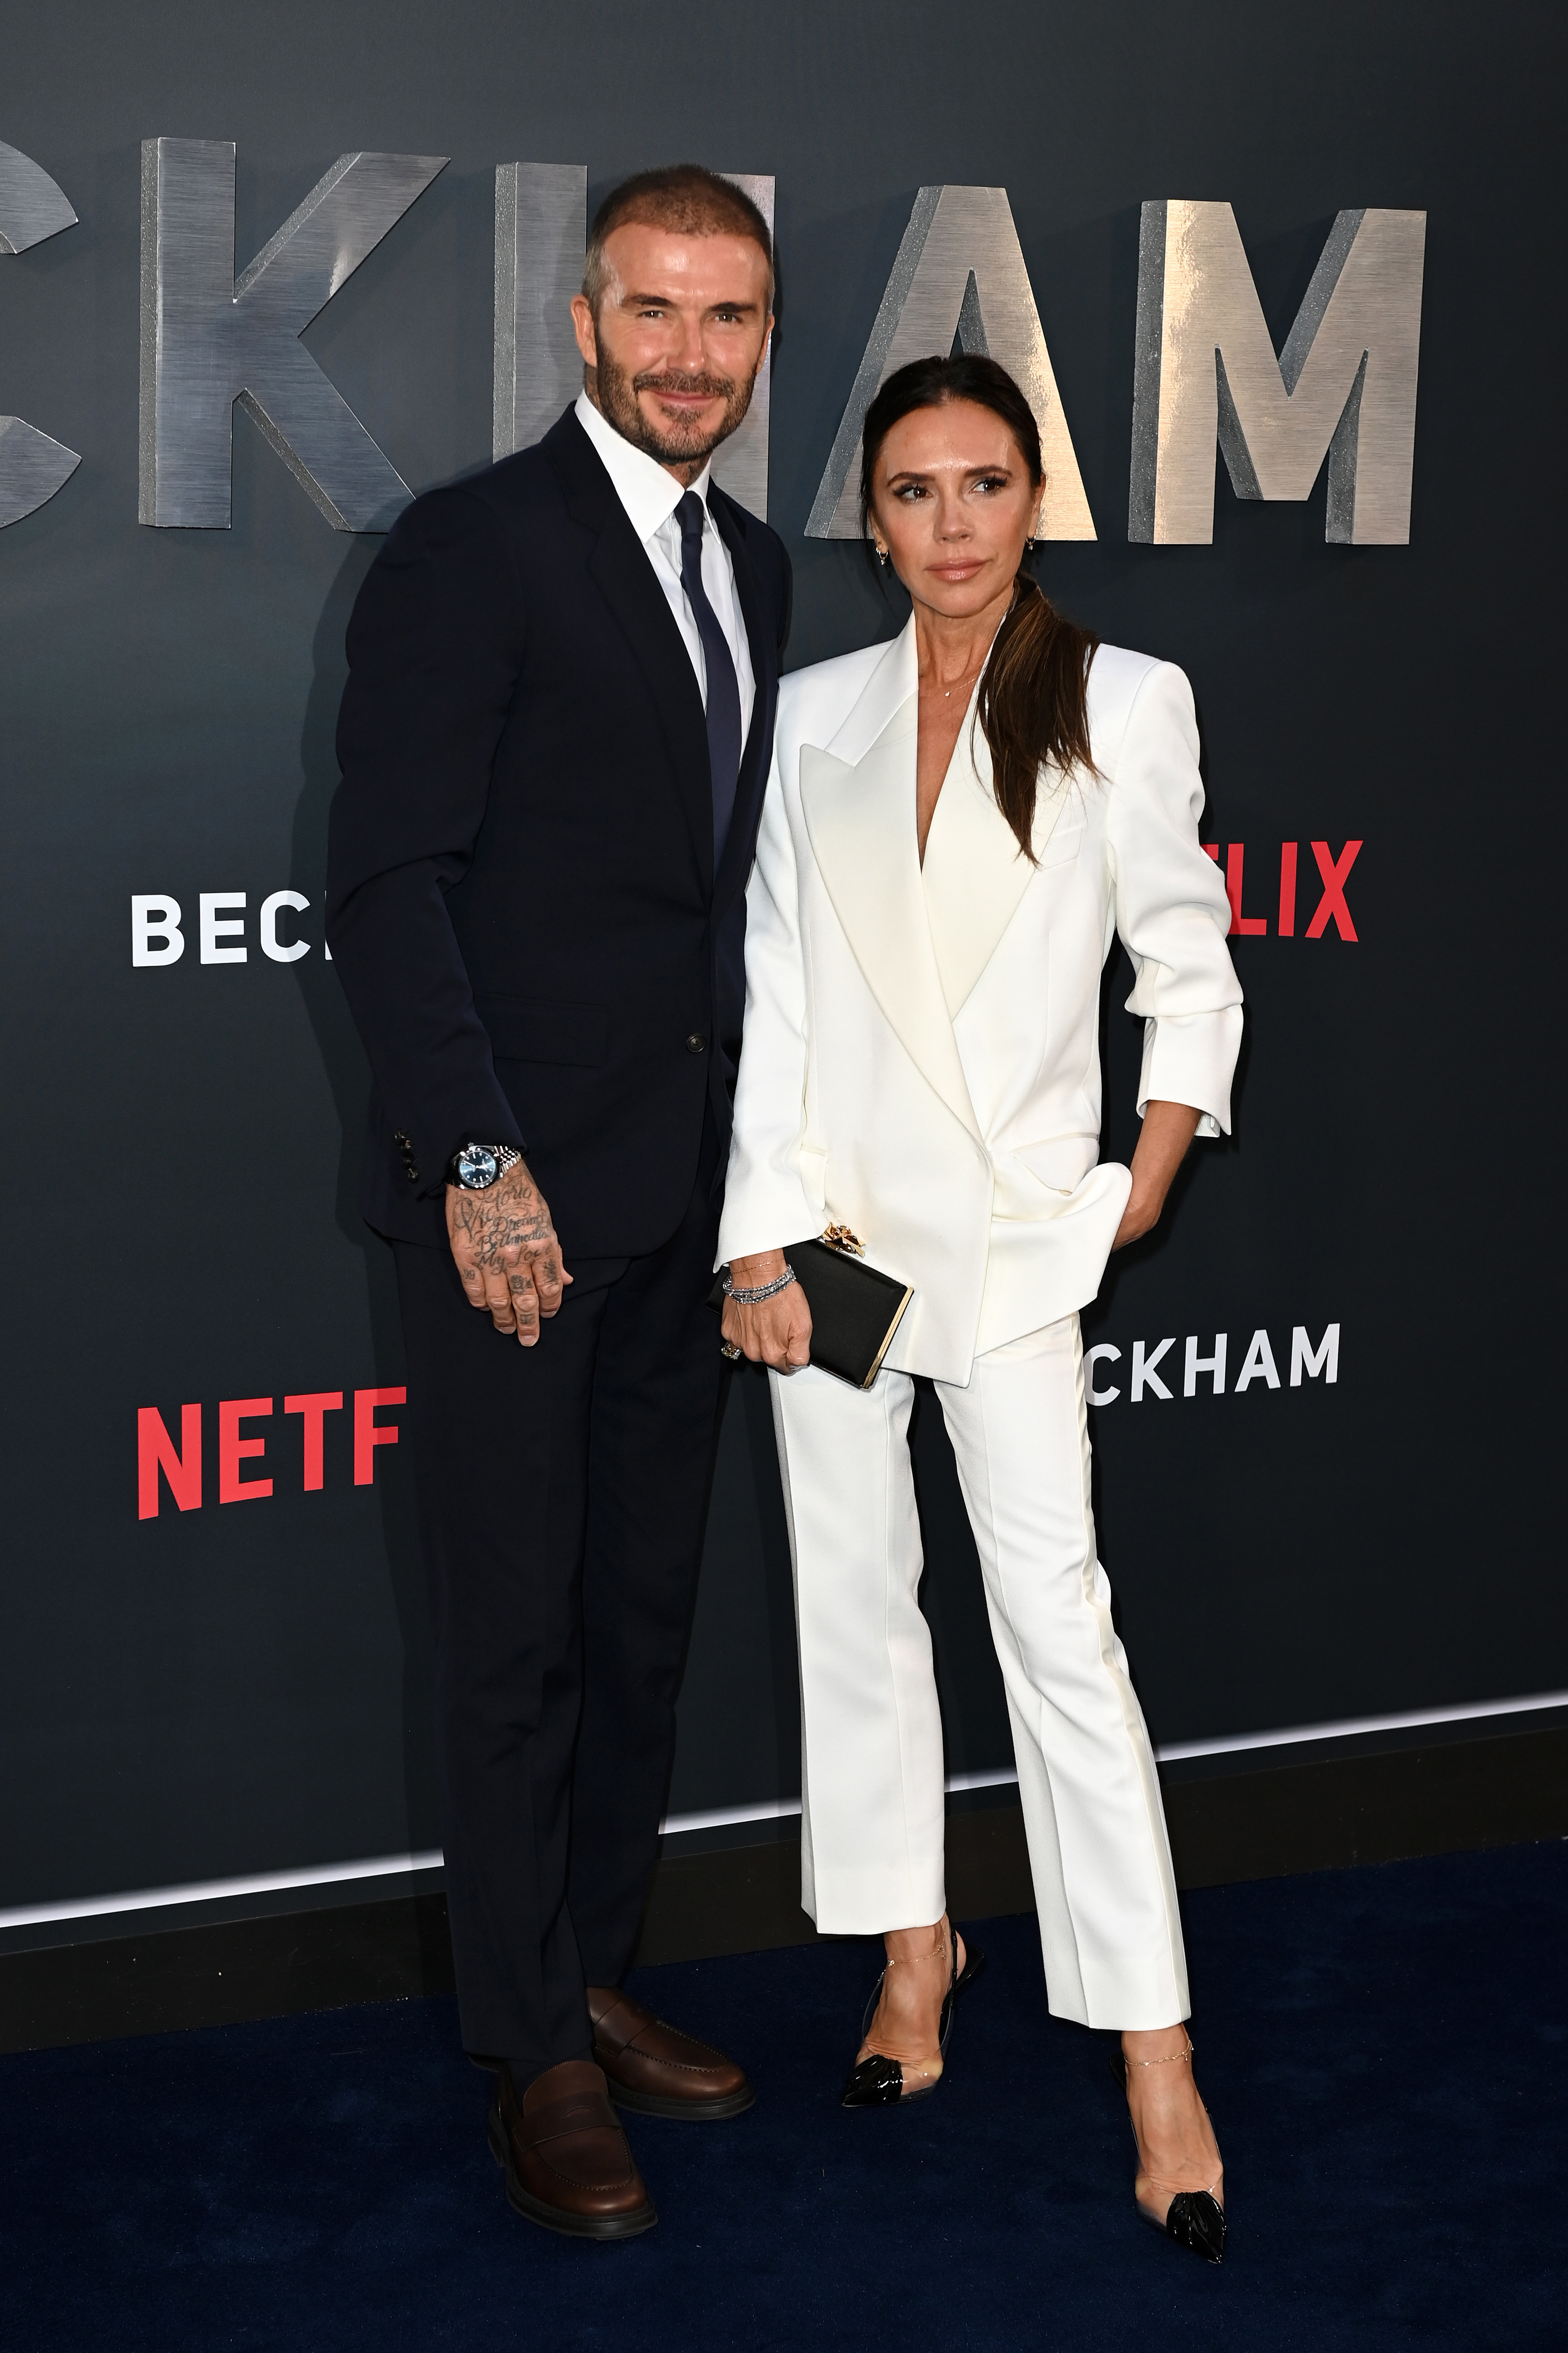 LONDON, ENGLAND - OCTOBER 03: David Beckham and Victoria Beckham attend the "Beckham" Premiere at The Curzon Mayfair on October 03, 2023 in London, England. (Photo by Kate Green/Getty Images)